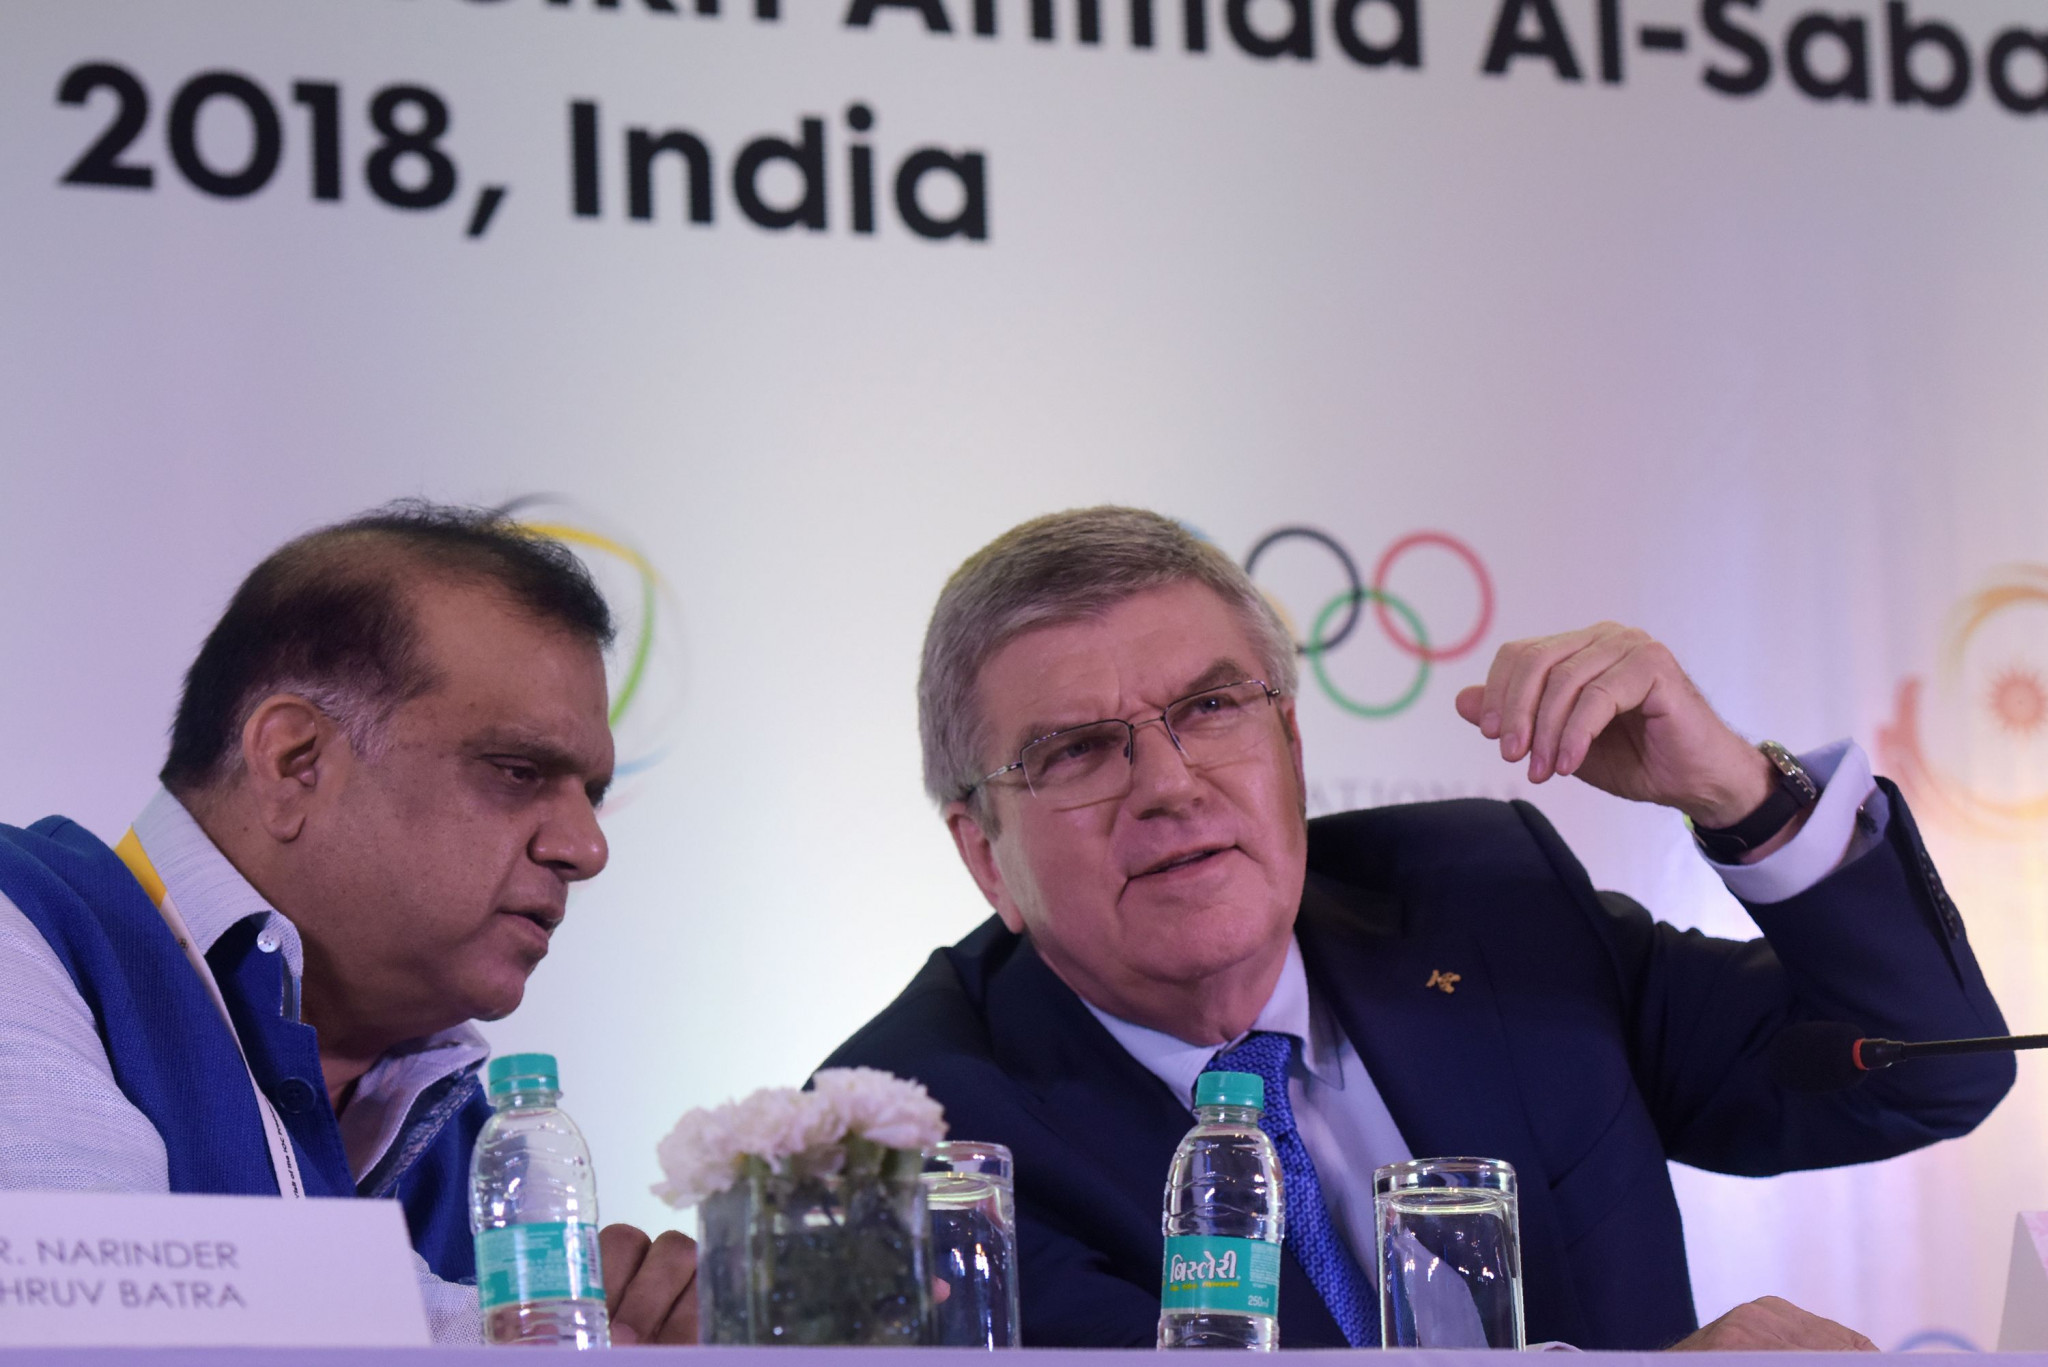 IOA President Narinder Batra's support of the boycott goes against the stance of IOC counterpart Thomas Bach ©Getty Images